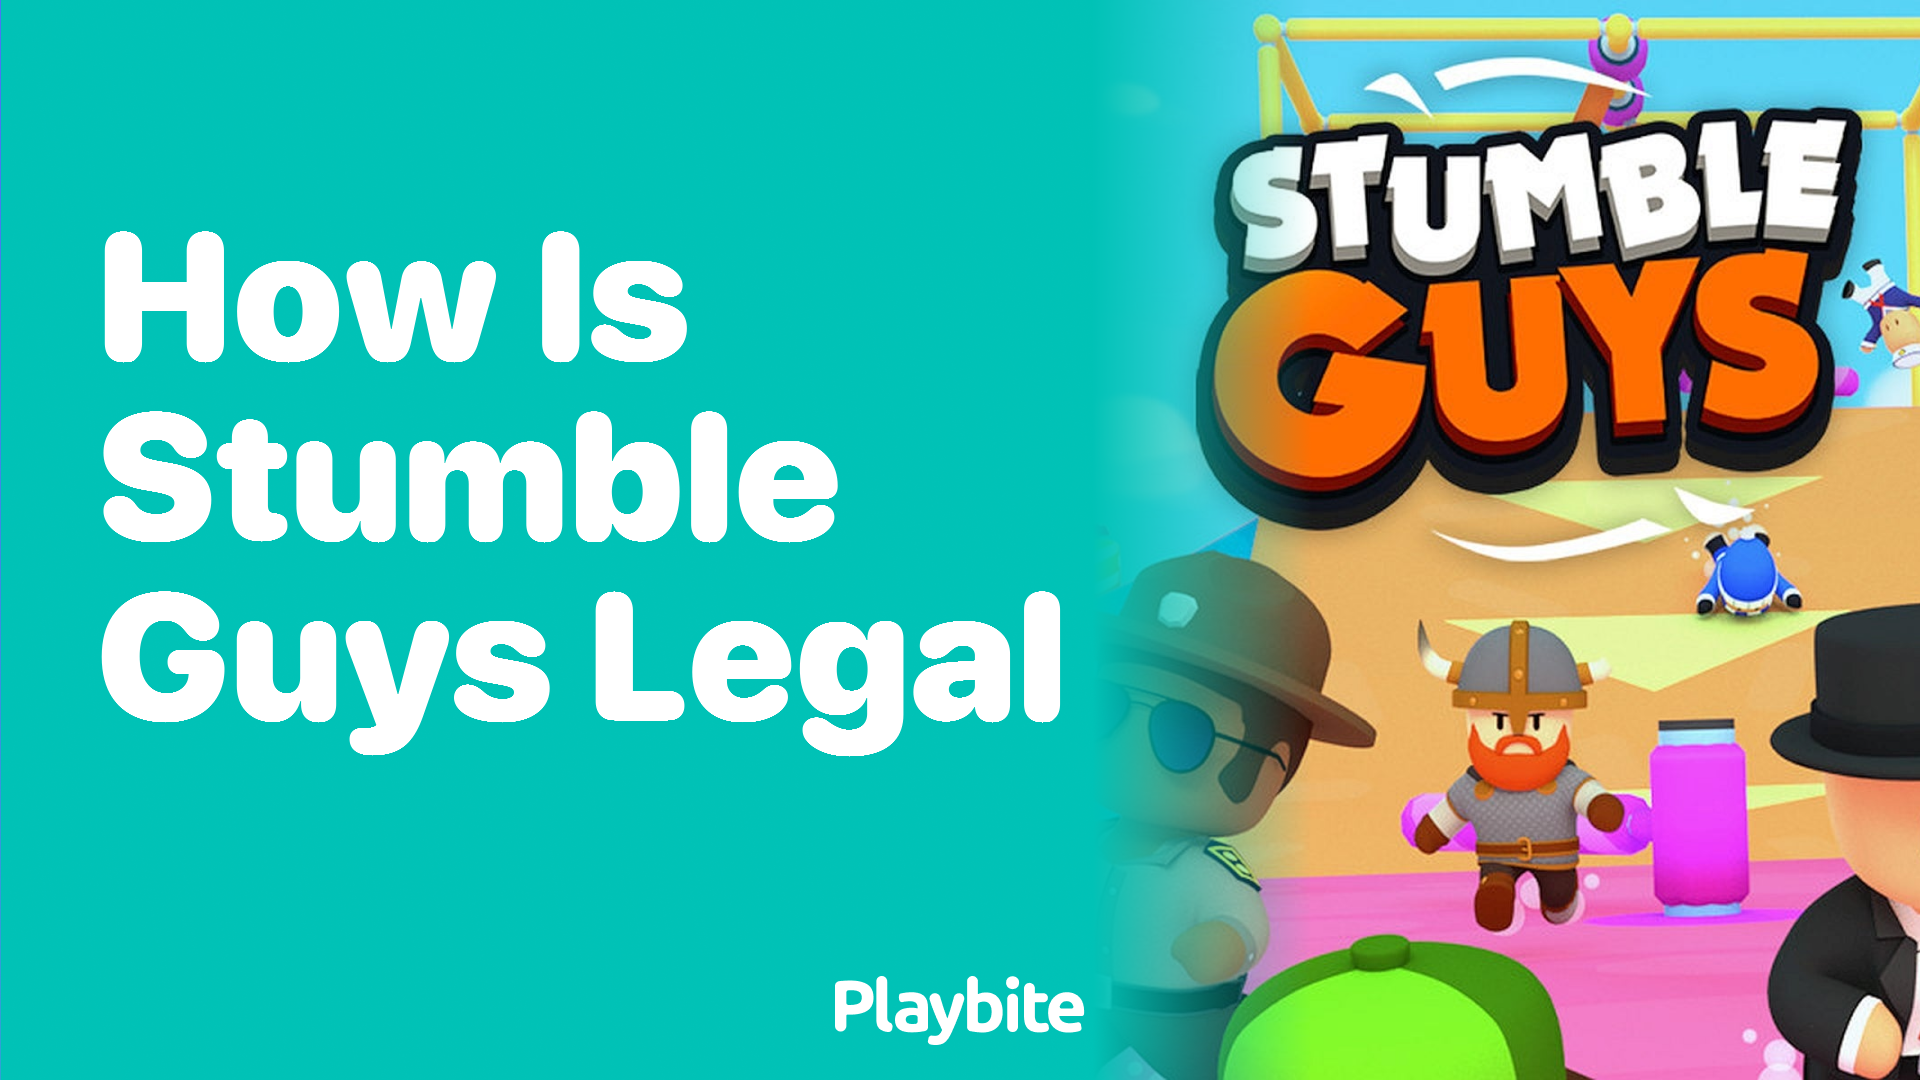 How is Stumble Guys Legal?